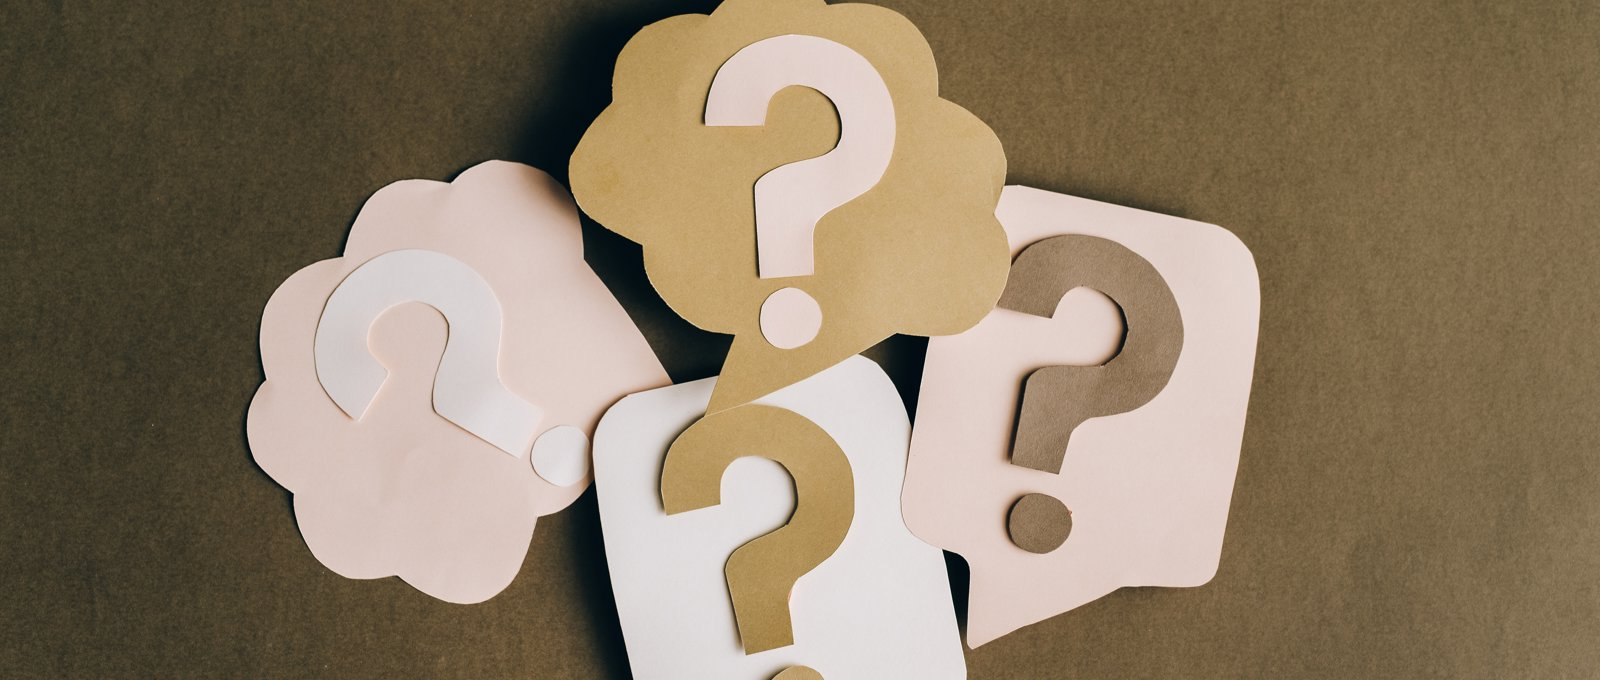 Photograph of four question marks made of paper cutouts